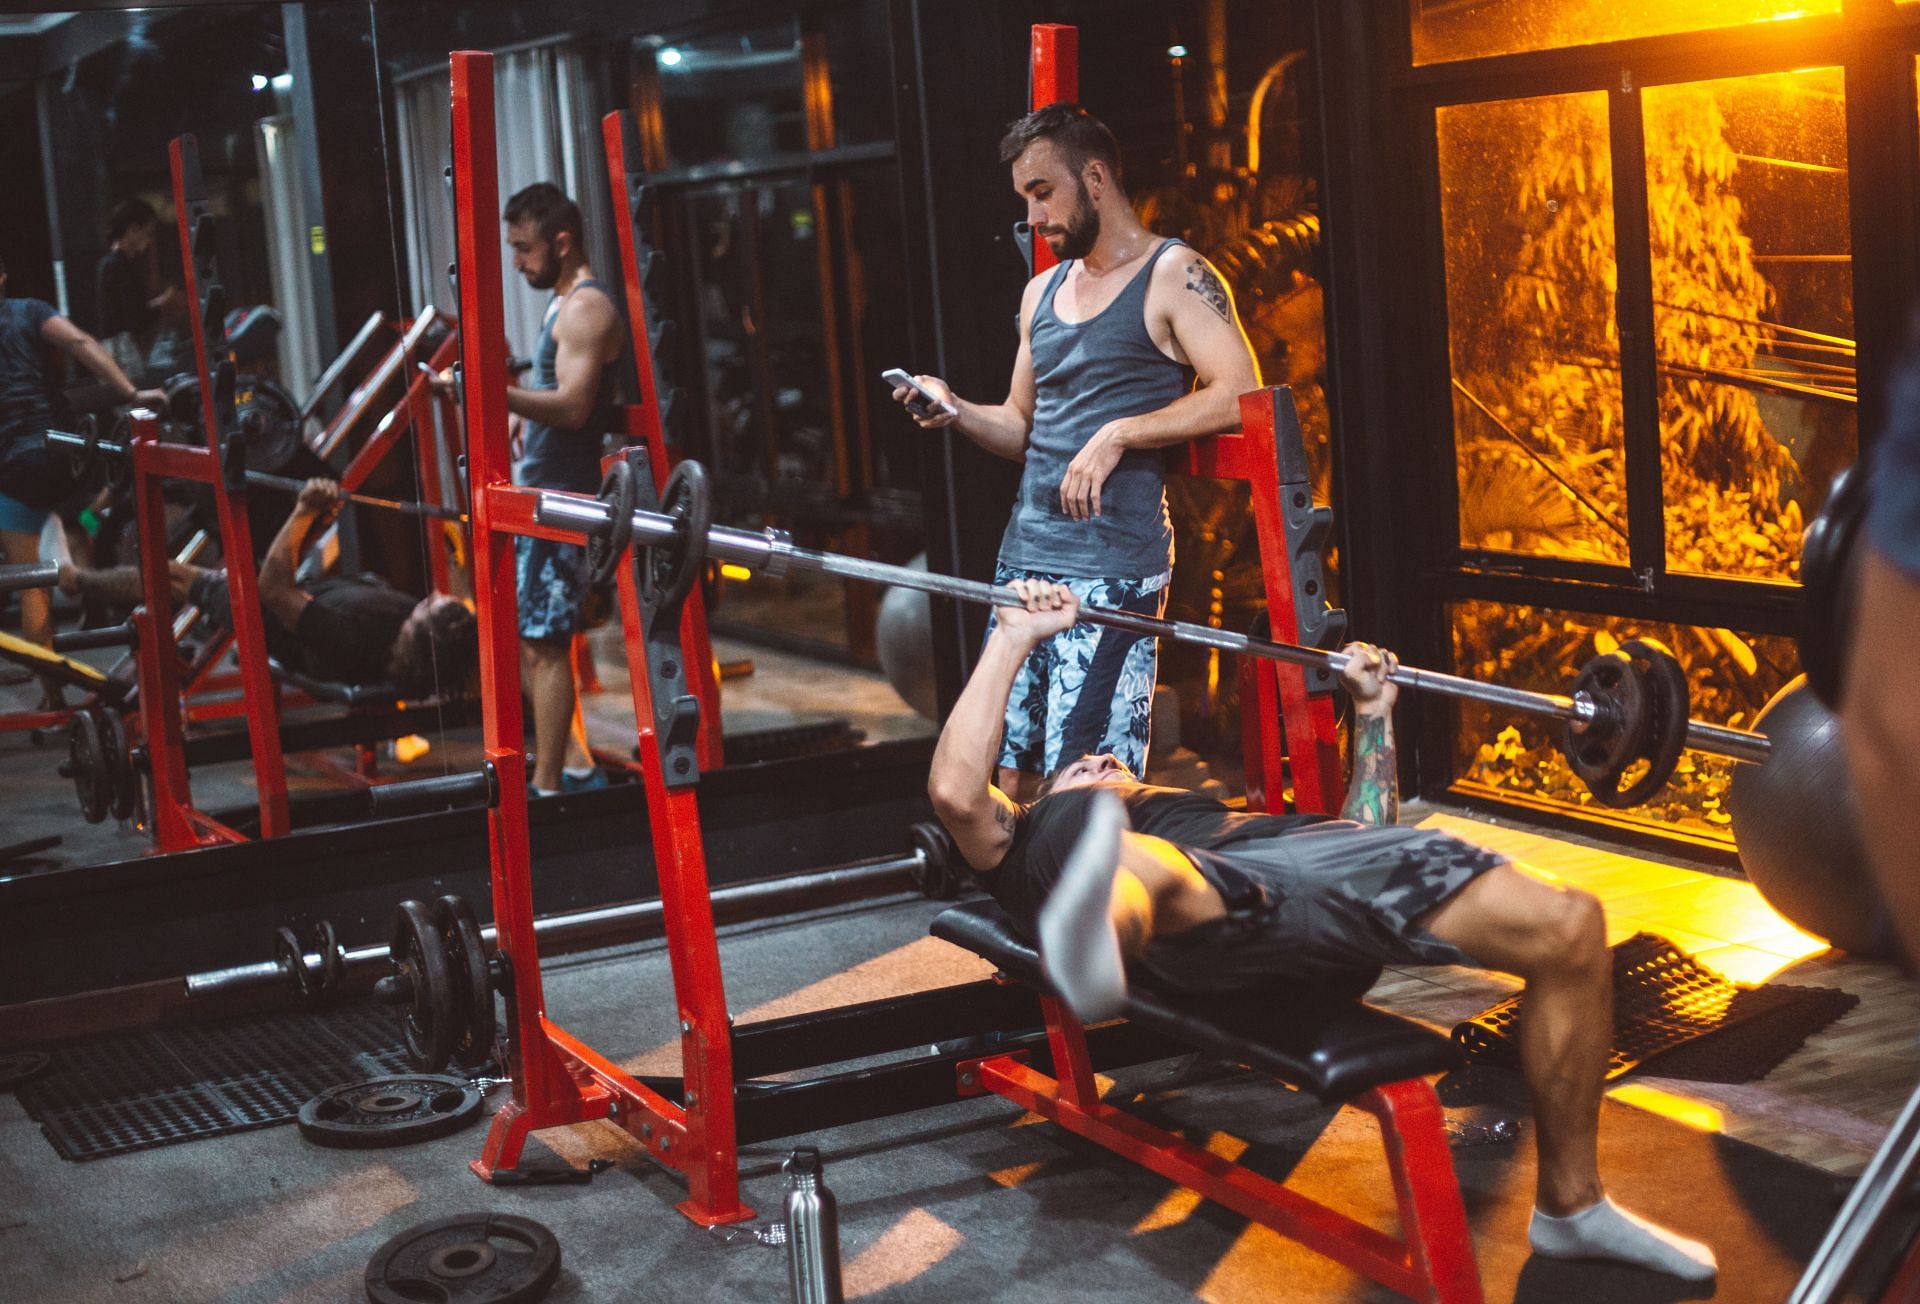 The weight bench provides a stable and secure surface for various weightlifting exercises (Photo by ROMAN ODINTSOV/pexels)